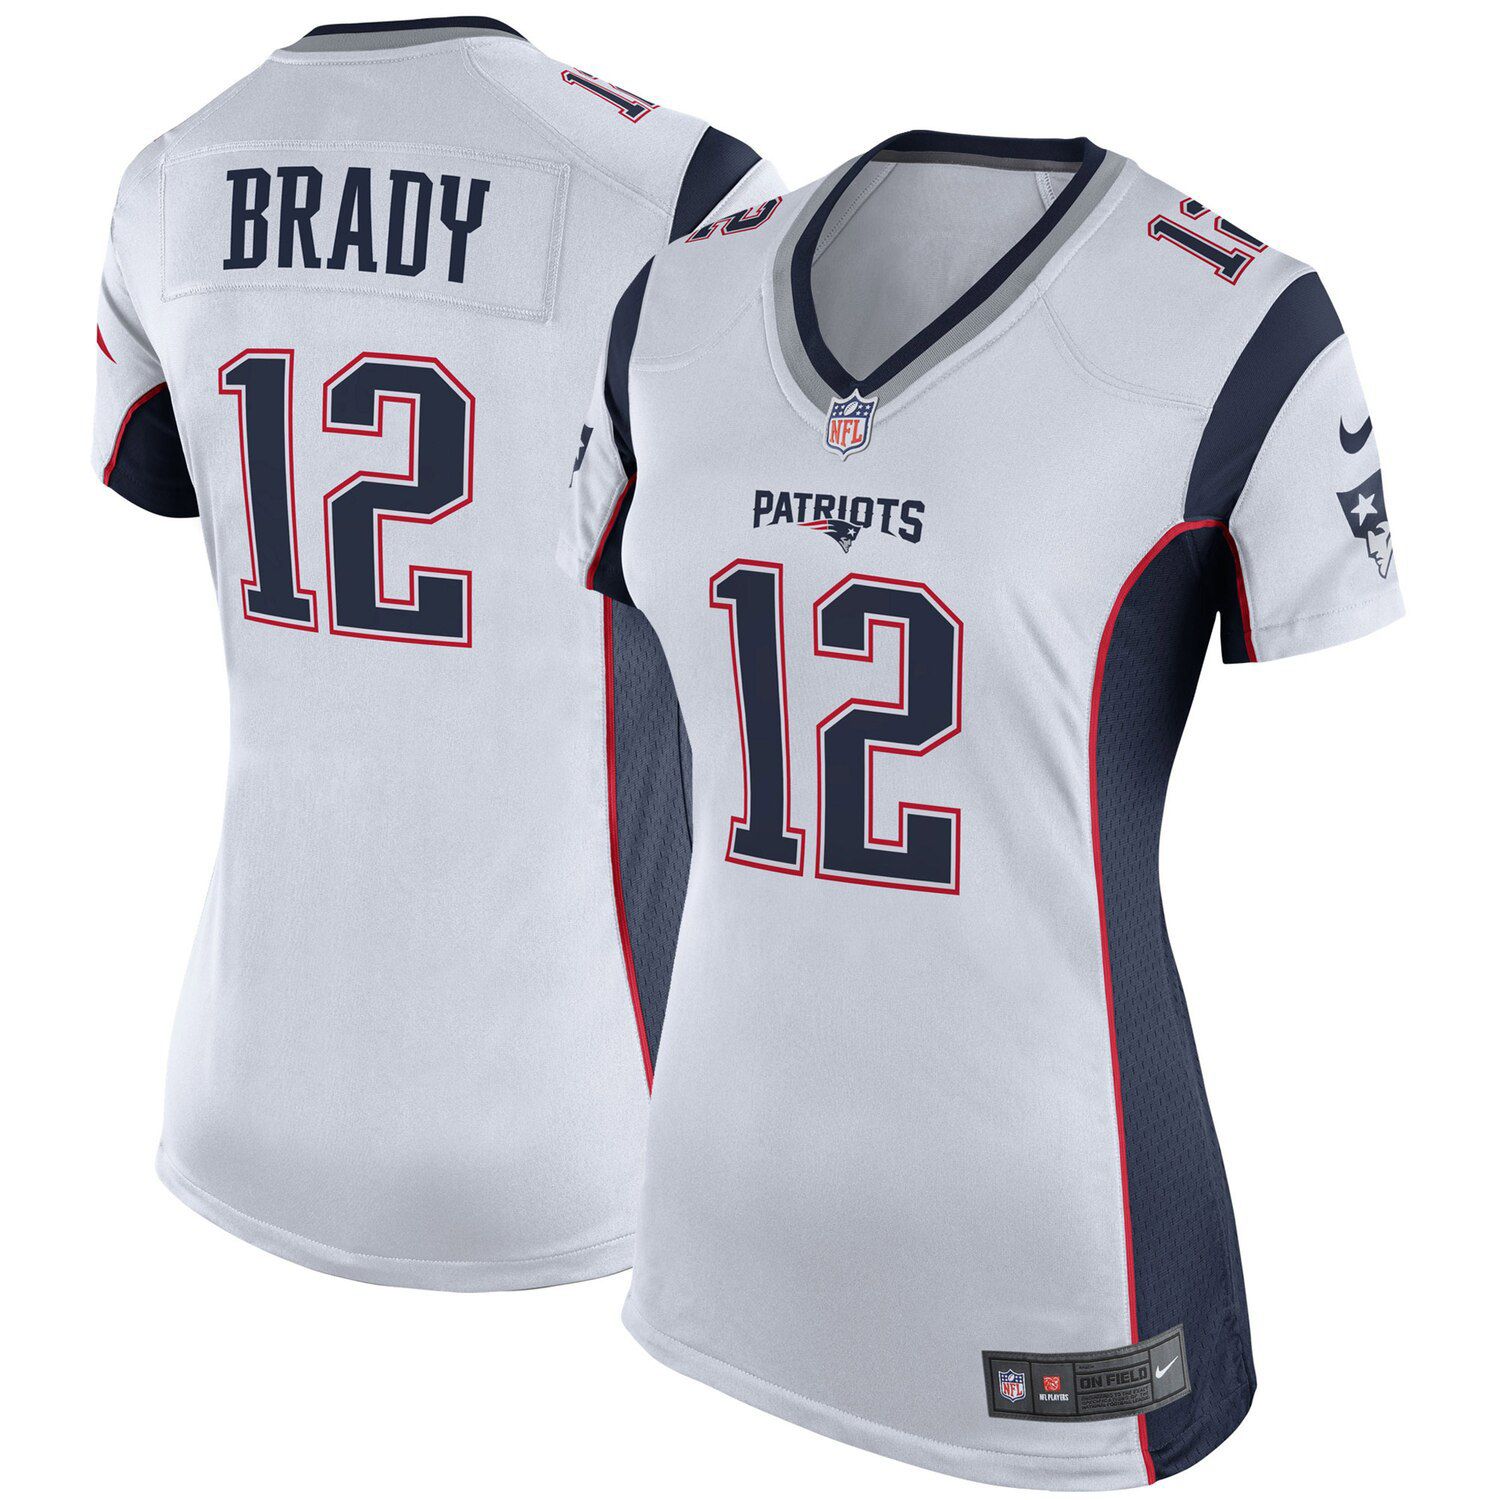 patriots game jersey nike